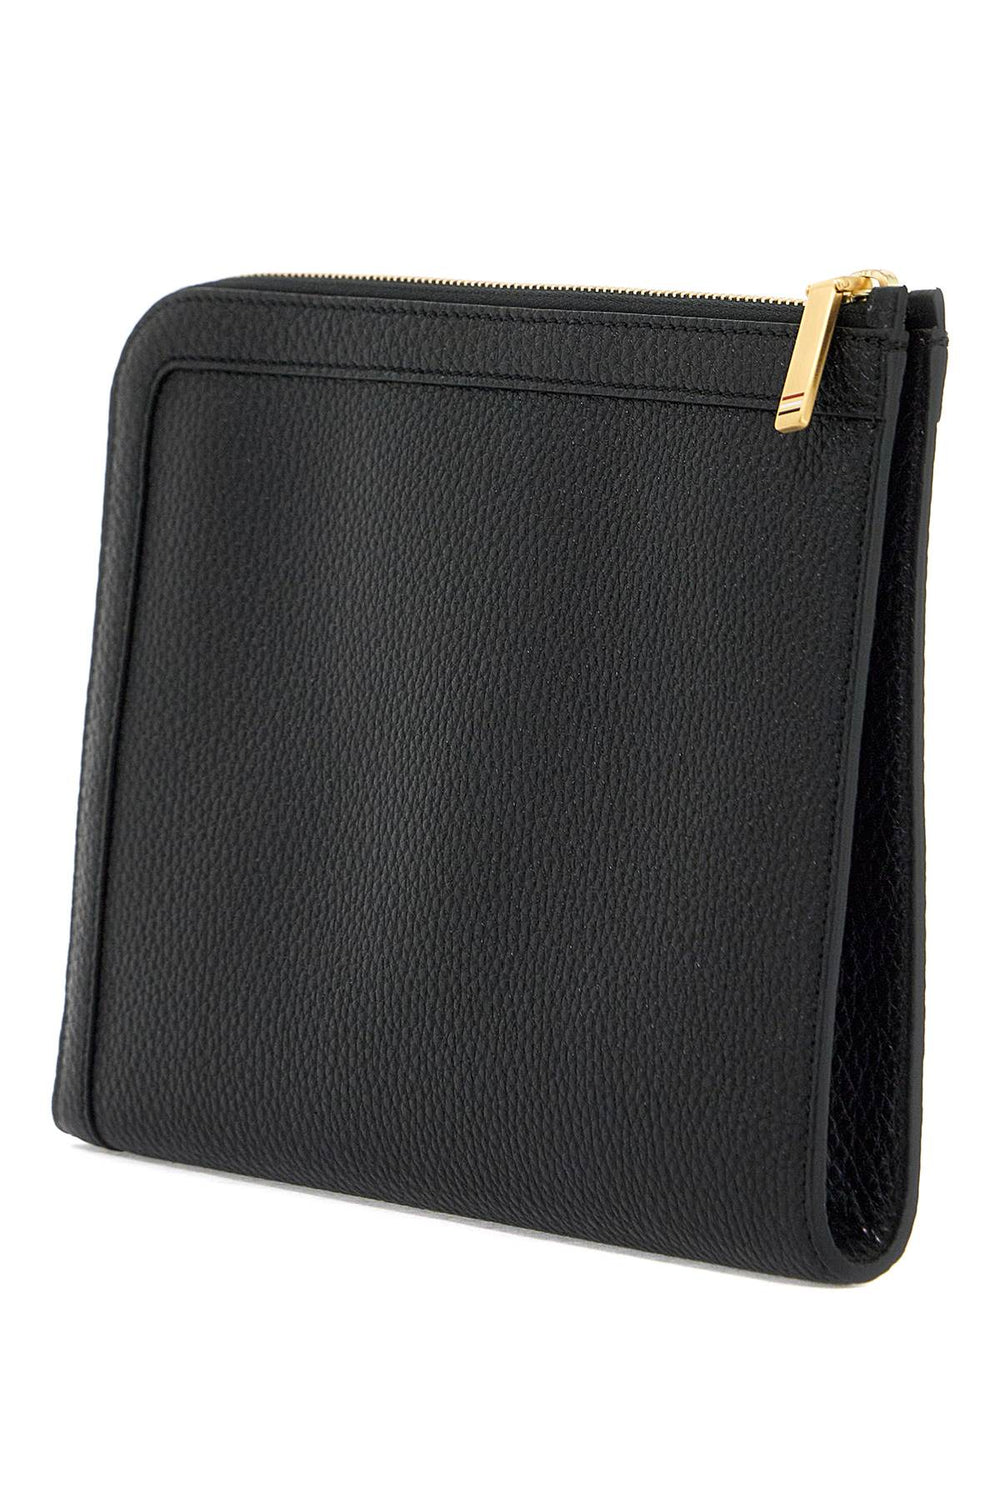 "embossed leather pouch-1